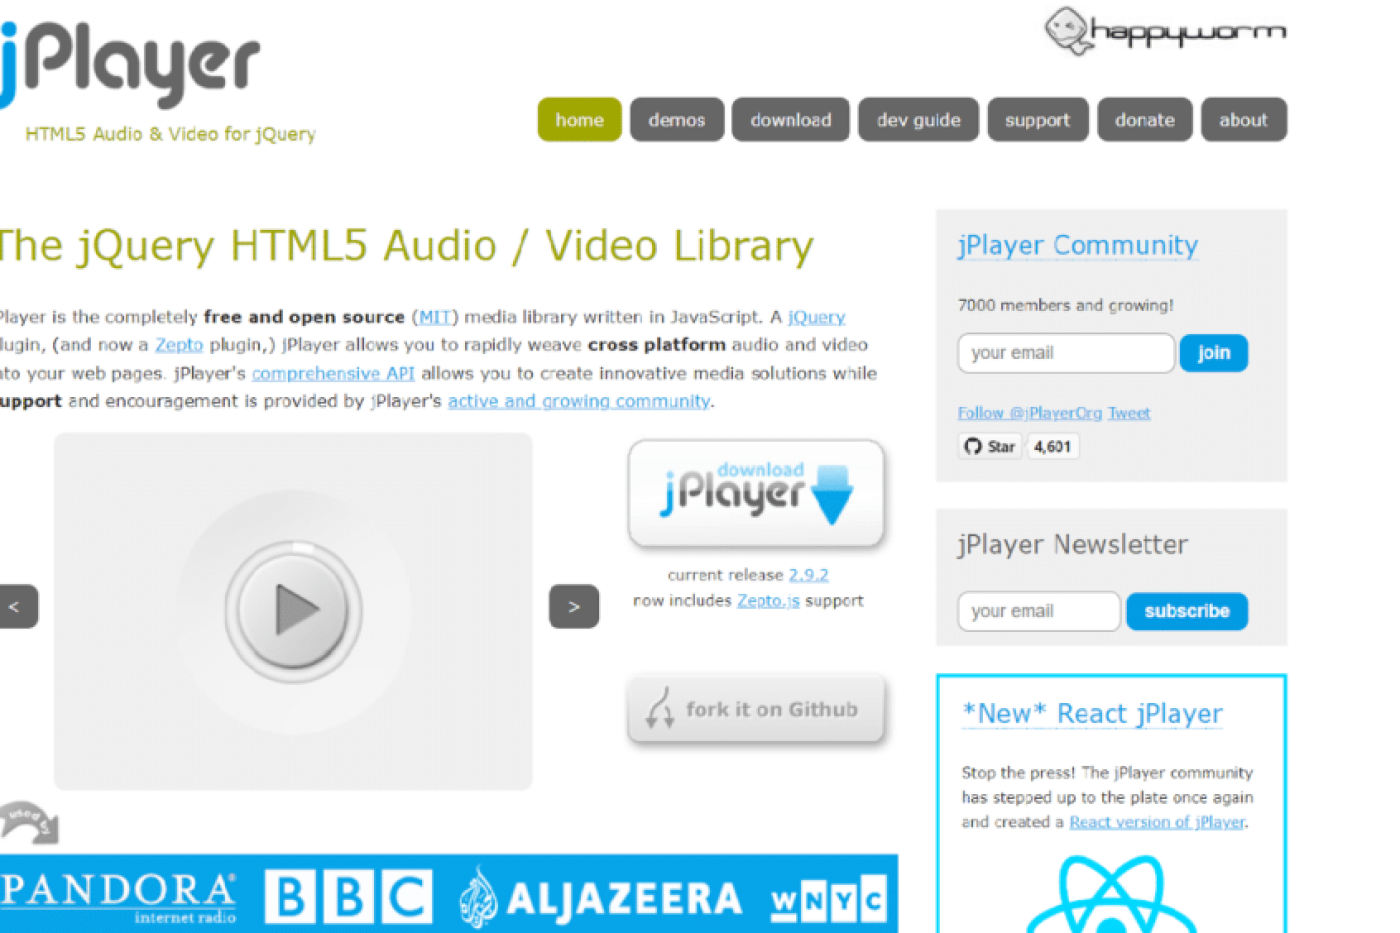 jPlayer Website Video Player: A Strong Contender In Online Video Streaming